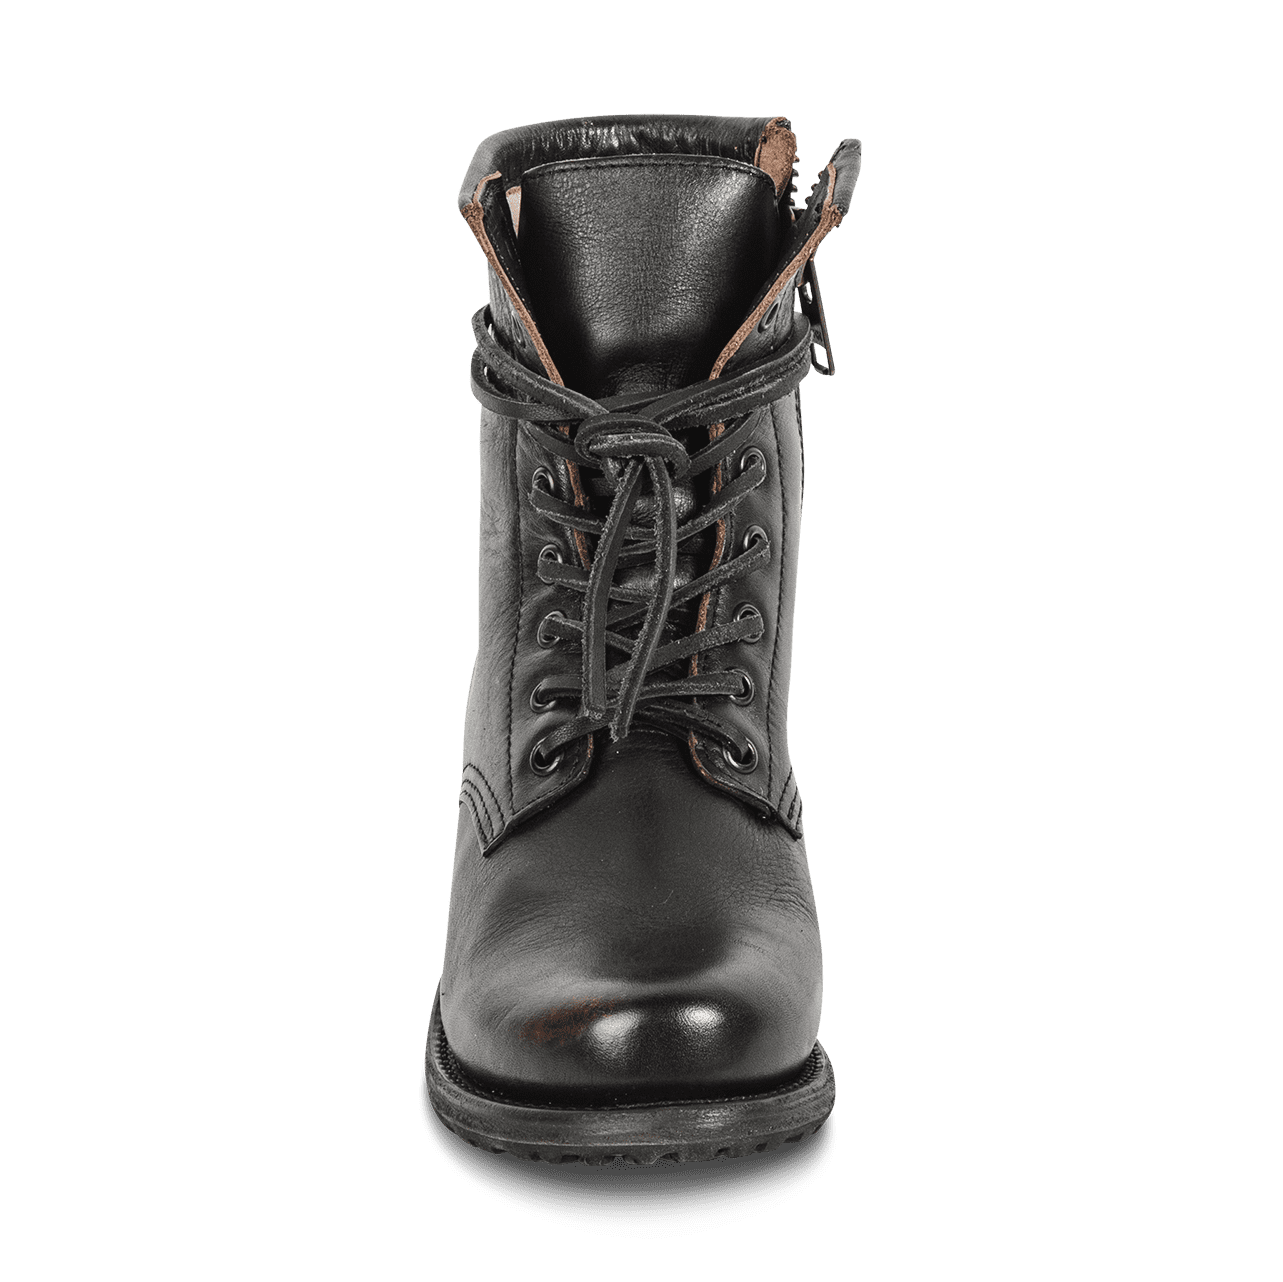 Front view showing adjustable leather lace closure on FREEBIRD women's Manchester black leather combat boot